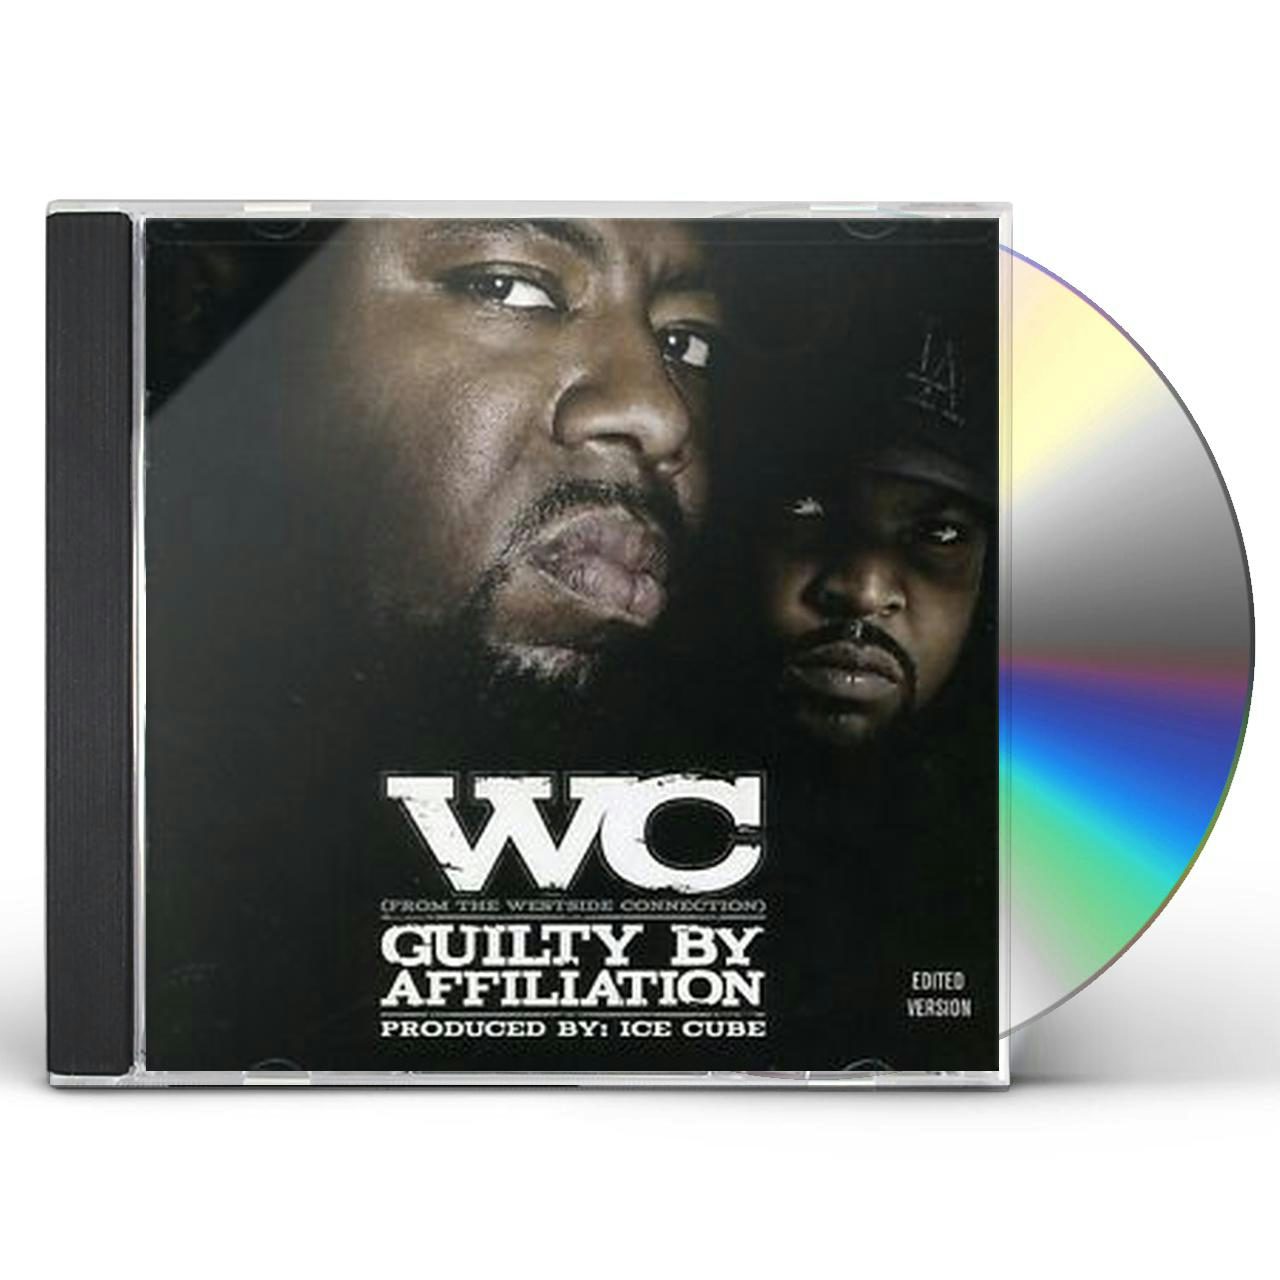 Guilty By Affiliation (Edited) CD - WC